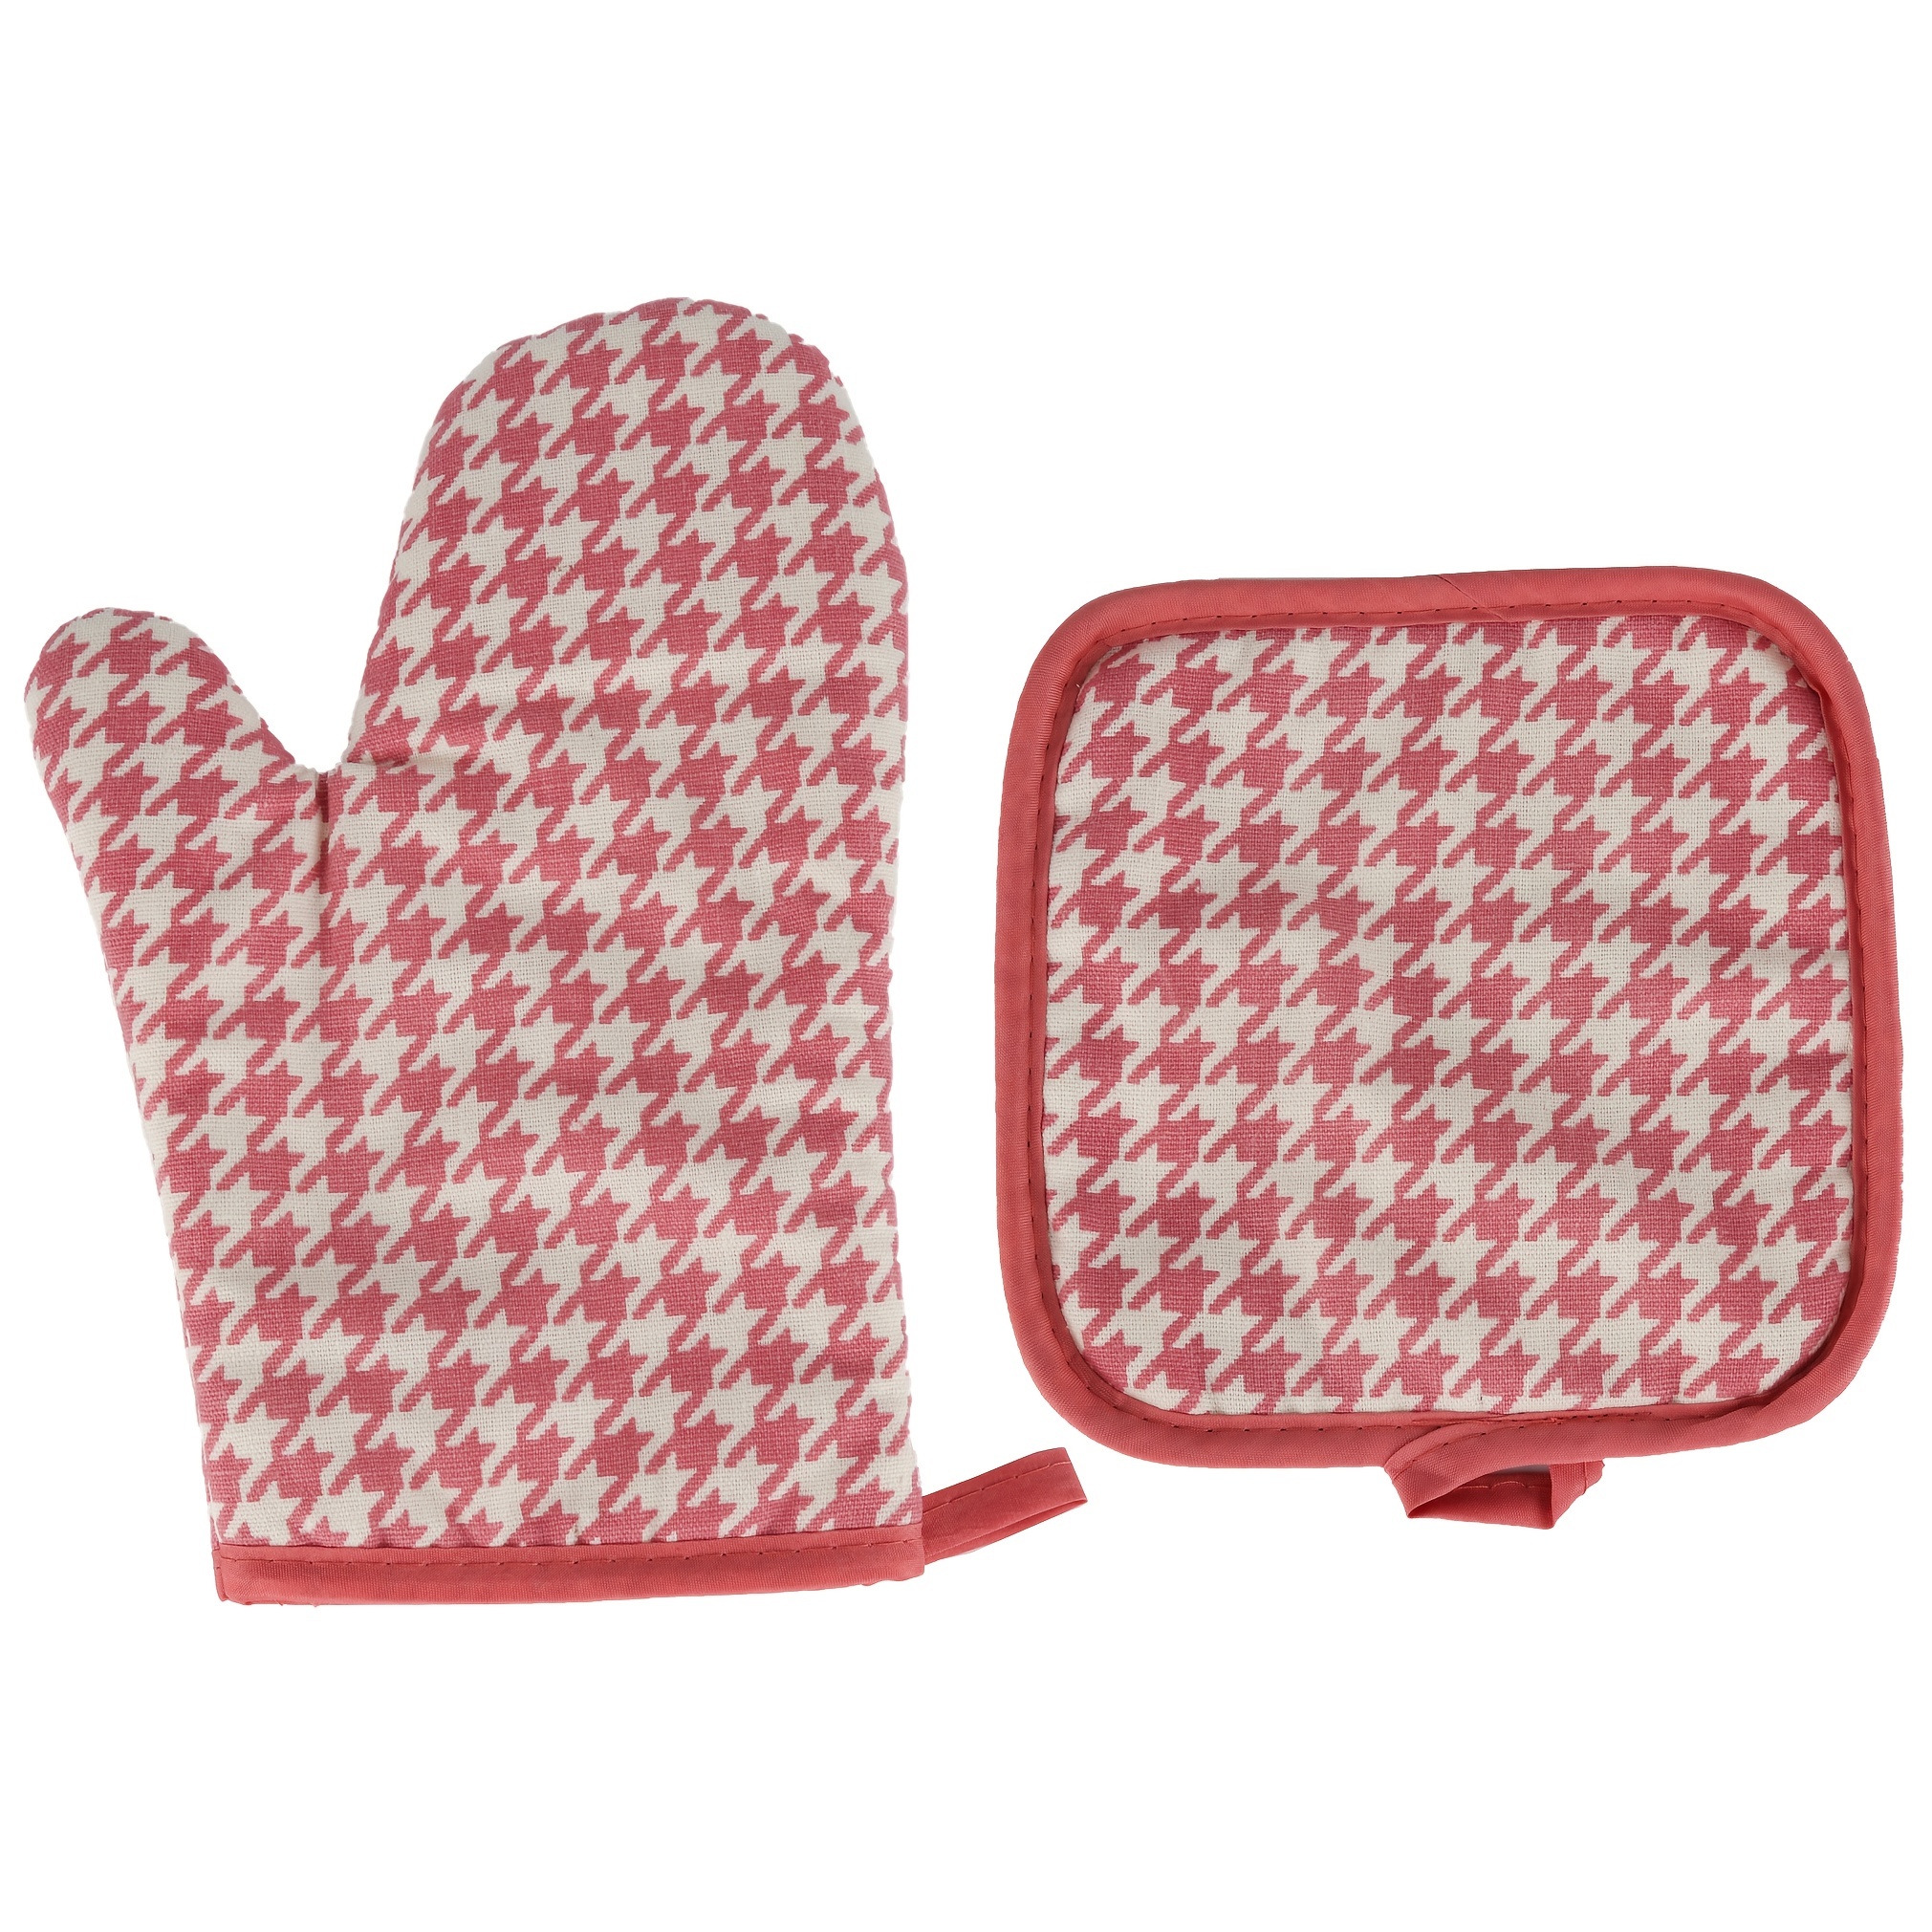 Pot Holders and Oven Mitts Gloves, 2 Potholders & 2 Hot Pads